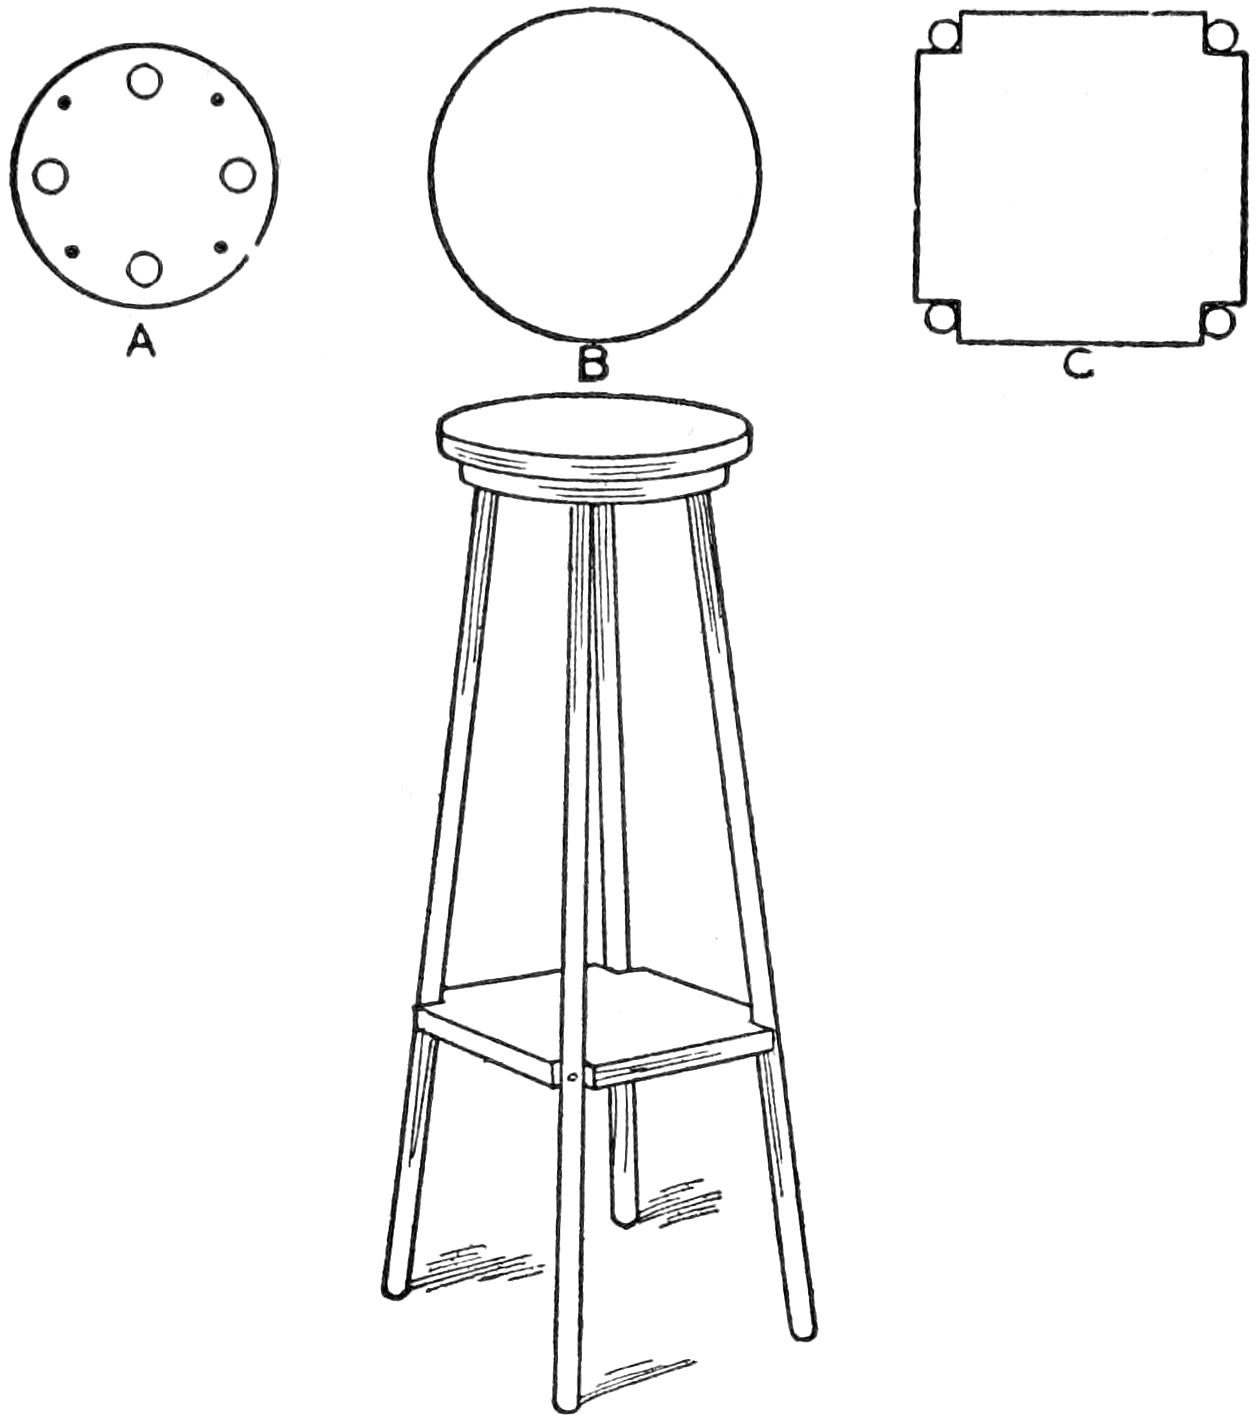 Elevation and details of the stool